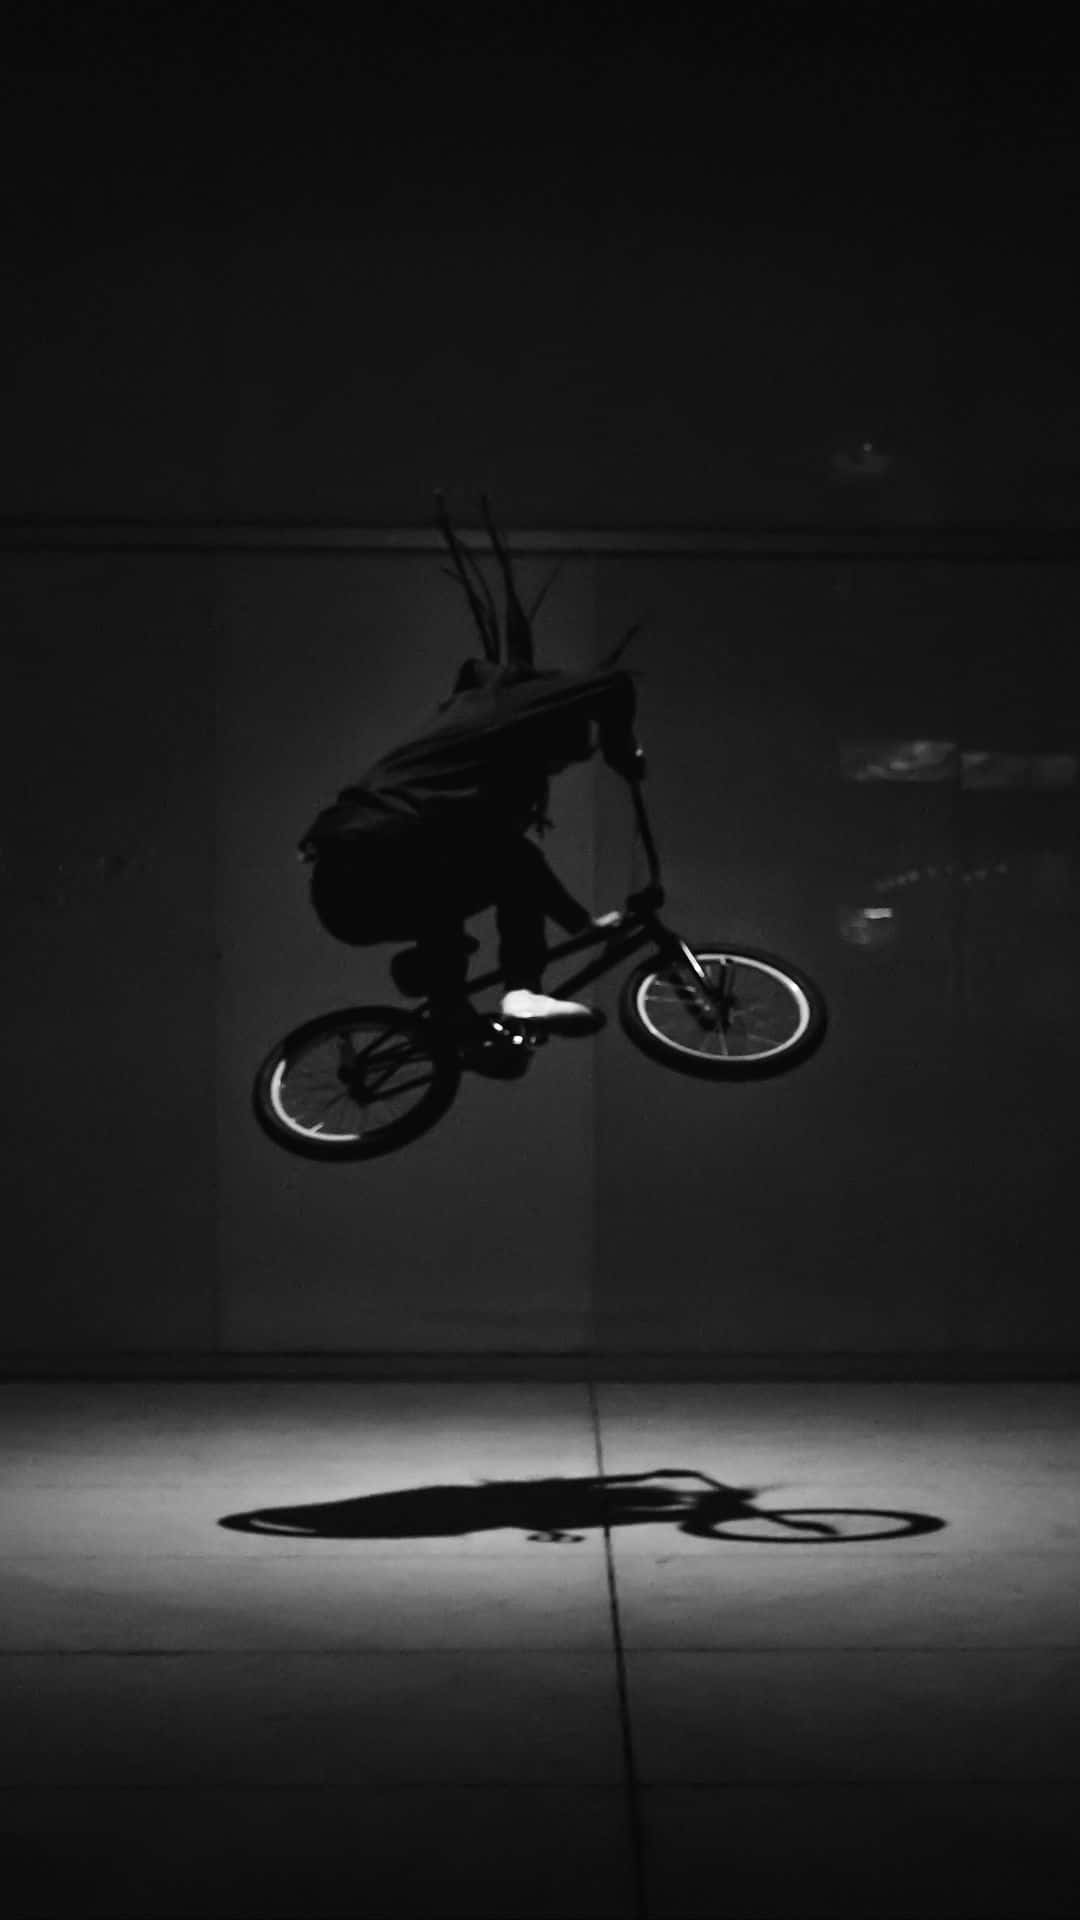 "Performing a backflip with smooth style and confidence on the BMX ramp!" Wallpaper